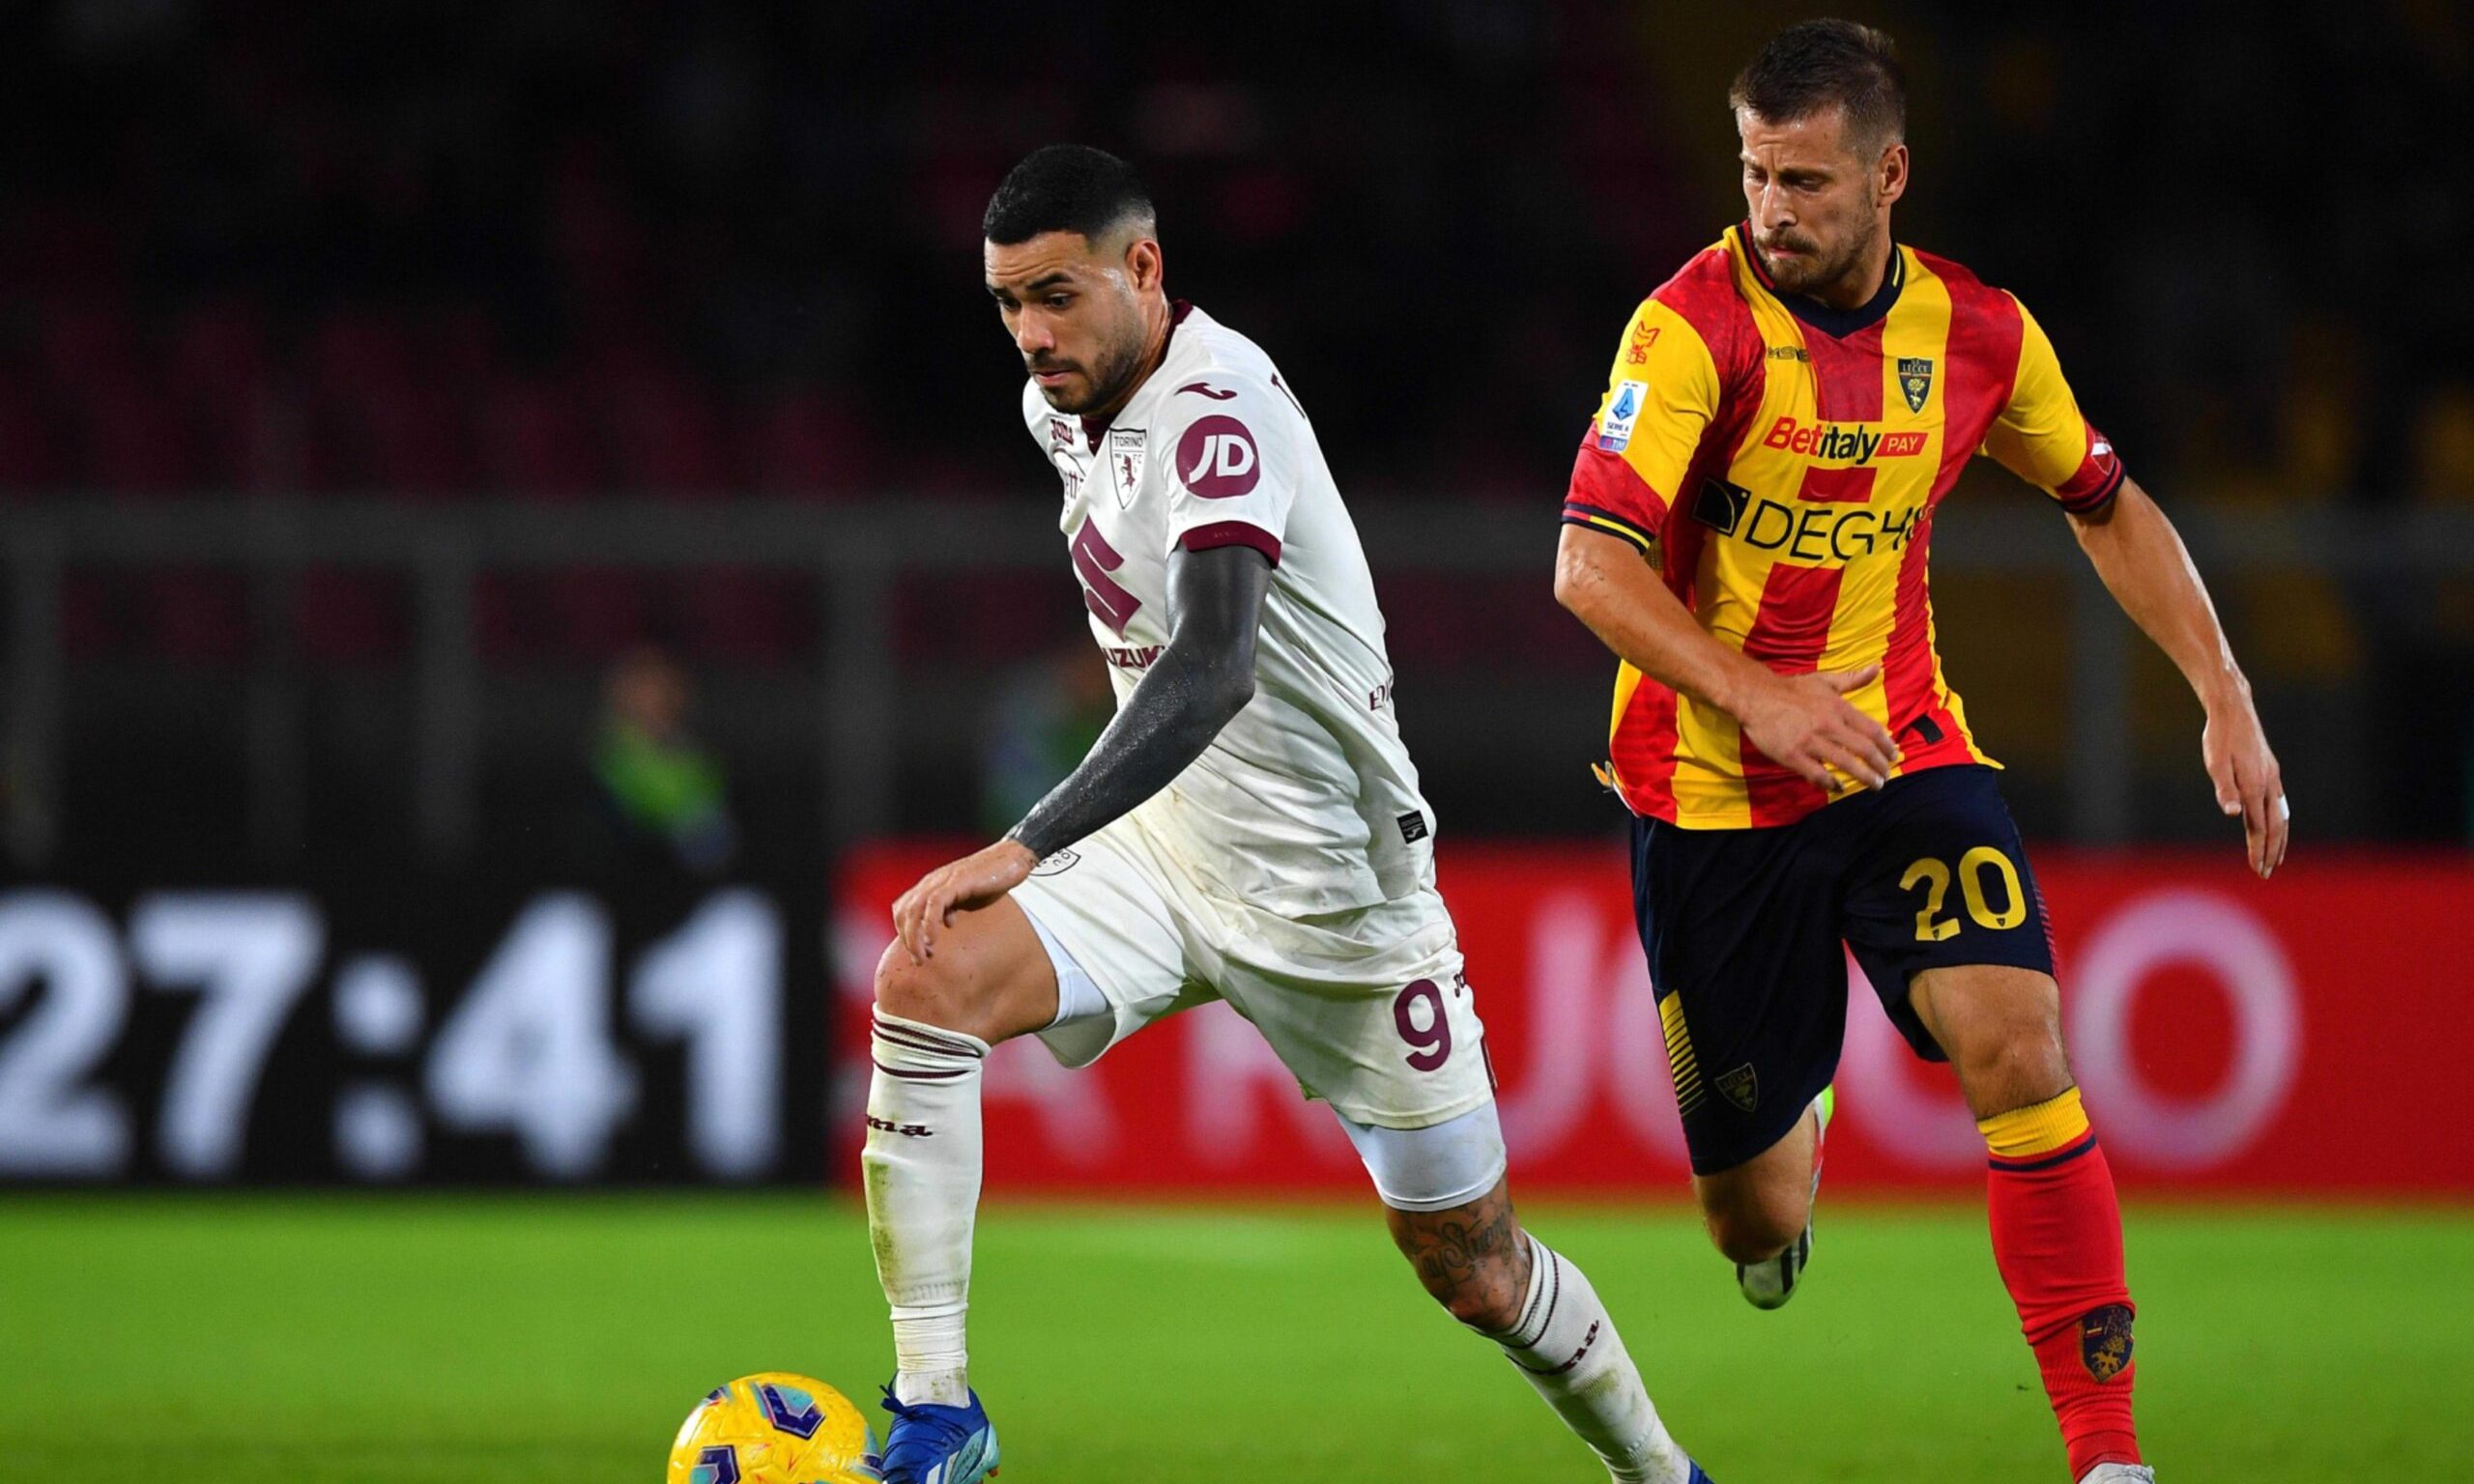 Former Aberdeen midfielder Ylber Ramadani in action for Lecce